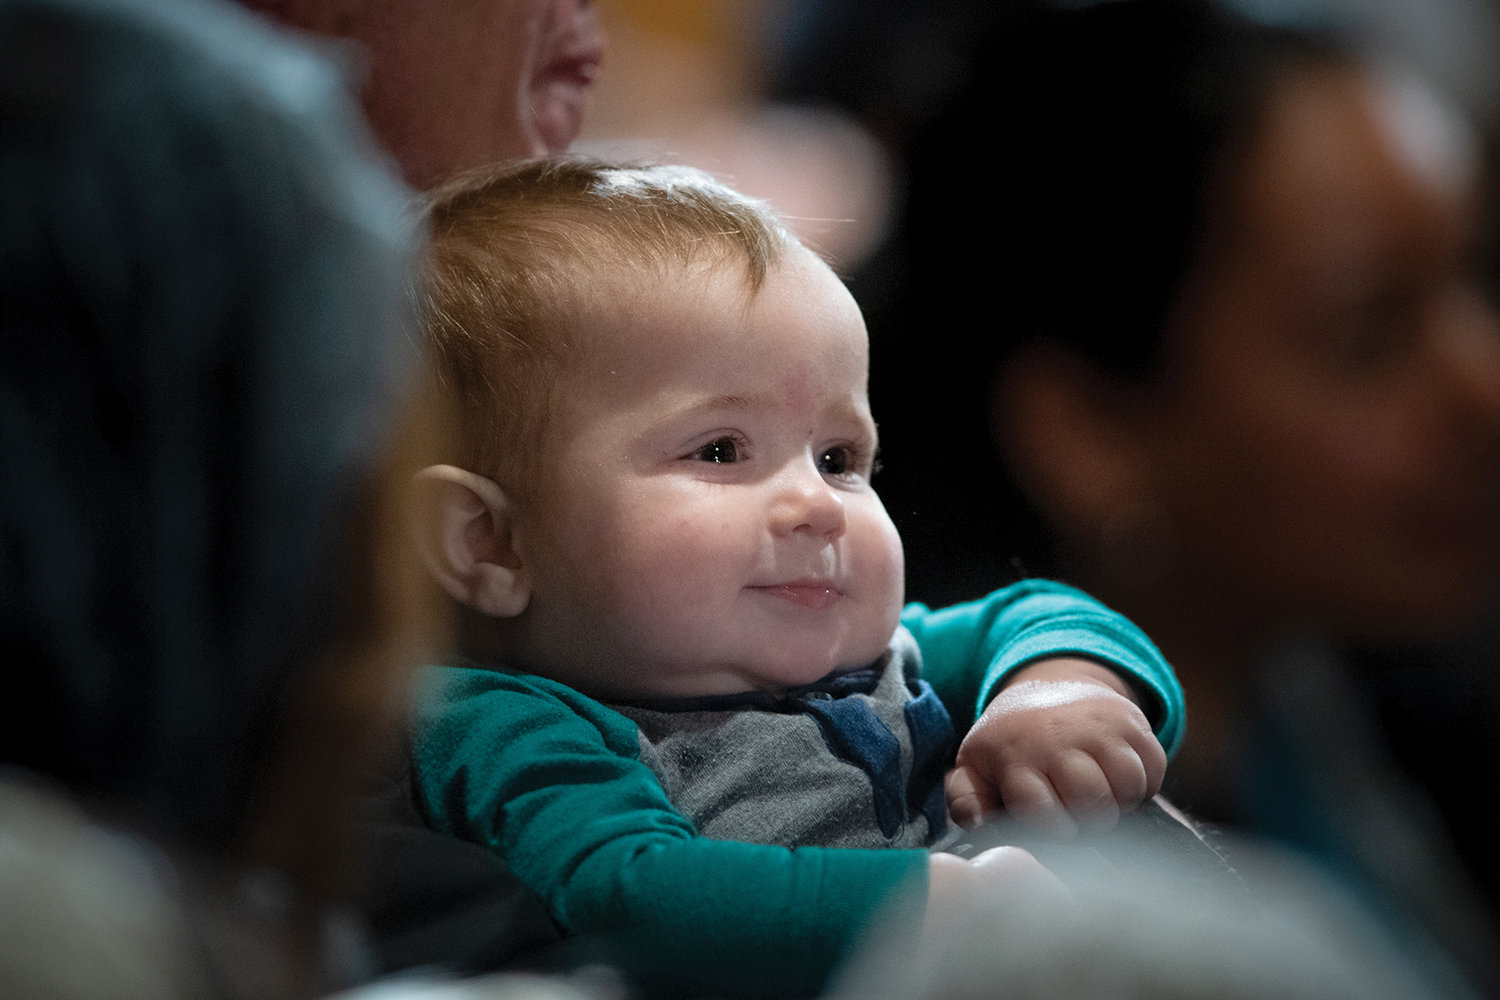 A baby’s face brightens the opening Mass of the National Prayer Vigil for Life in the Basilica of the National Shrine of the Immaculate Conception Jan. 23.